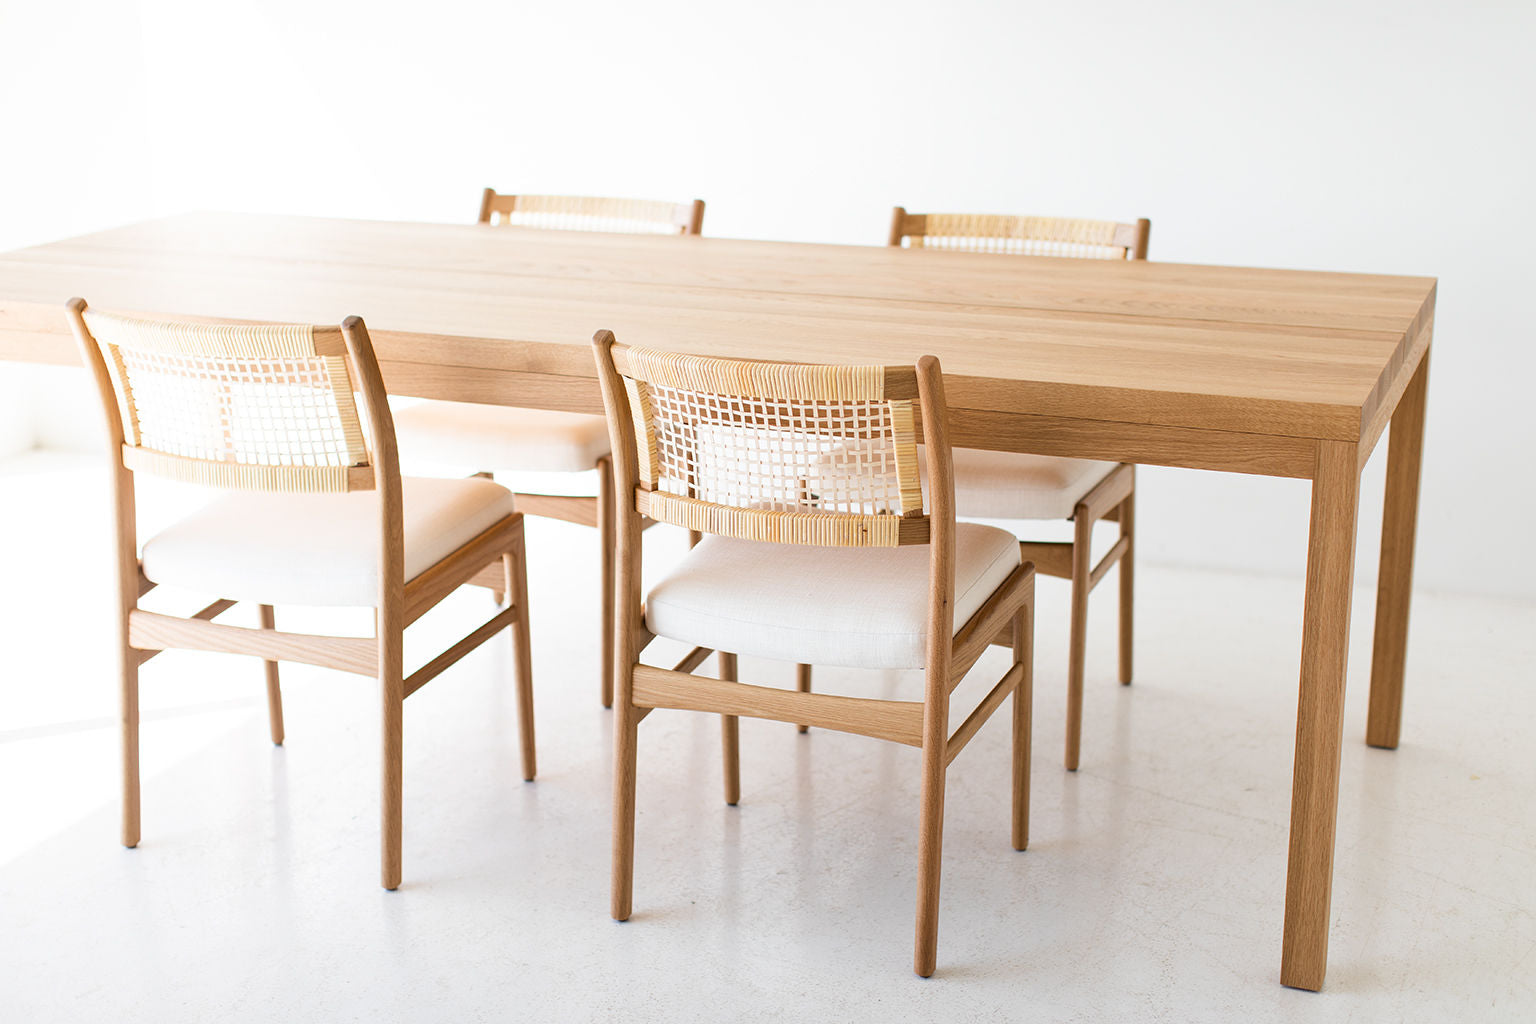      tribute-modern-dining-chairs-cane-oak-t1002-07